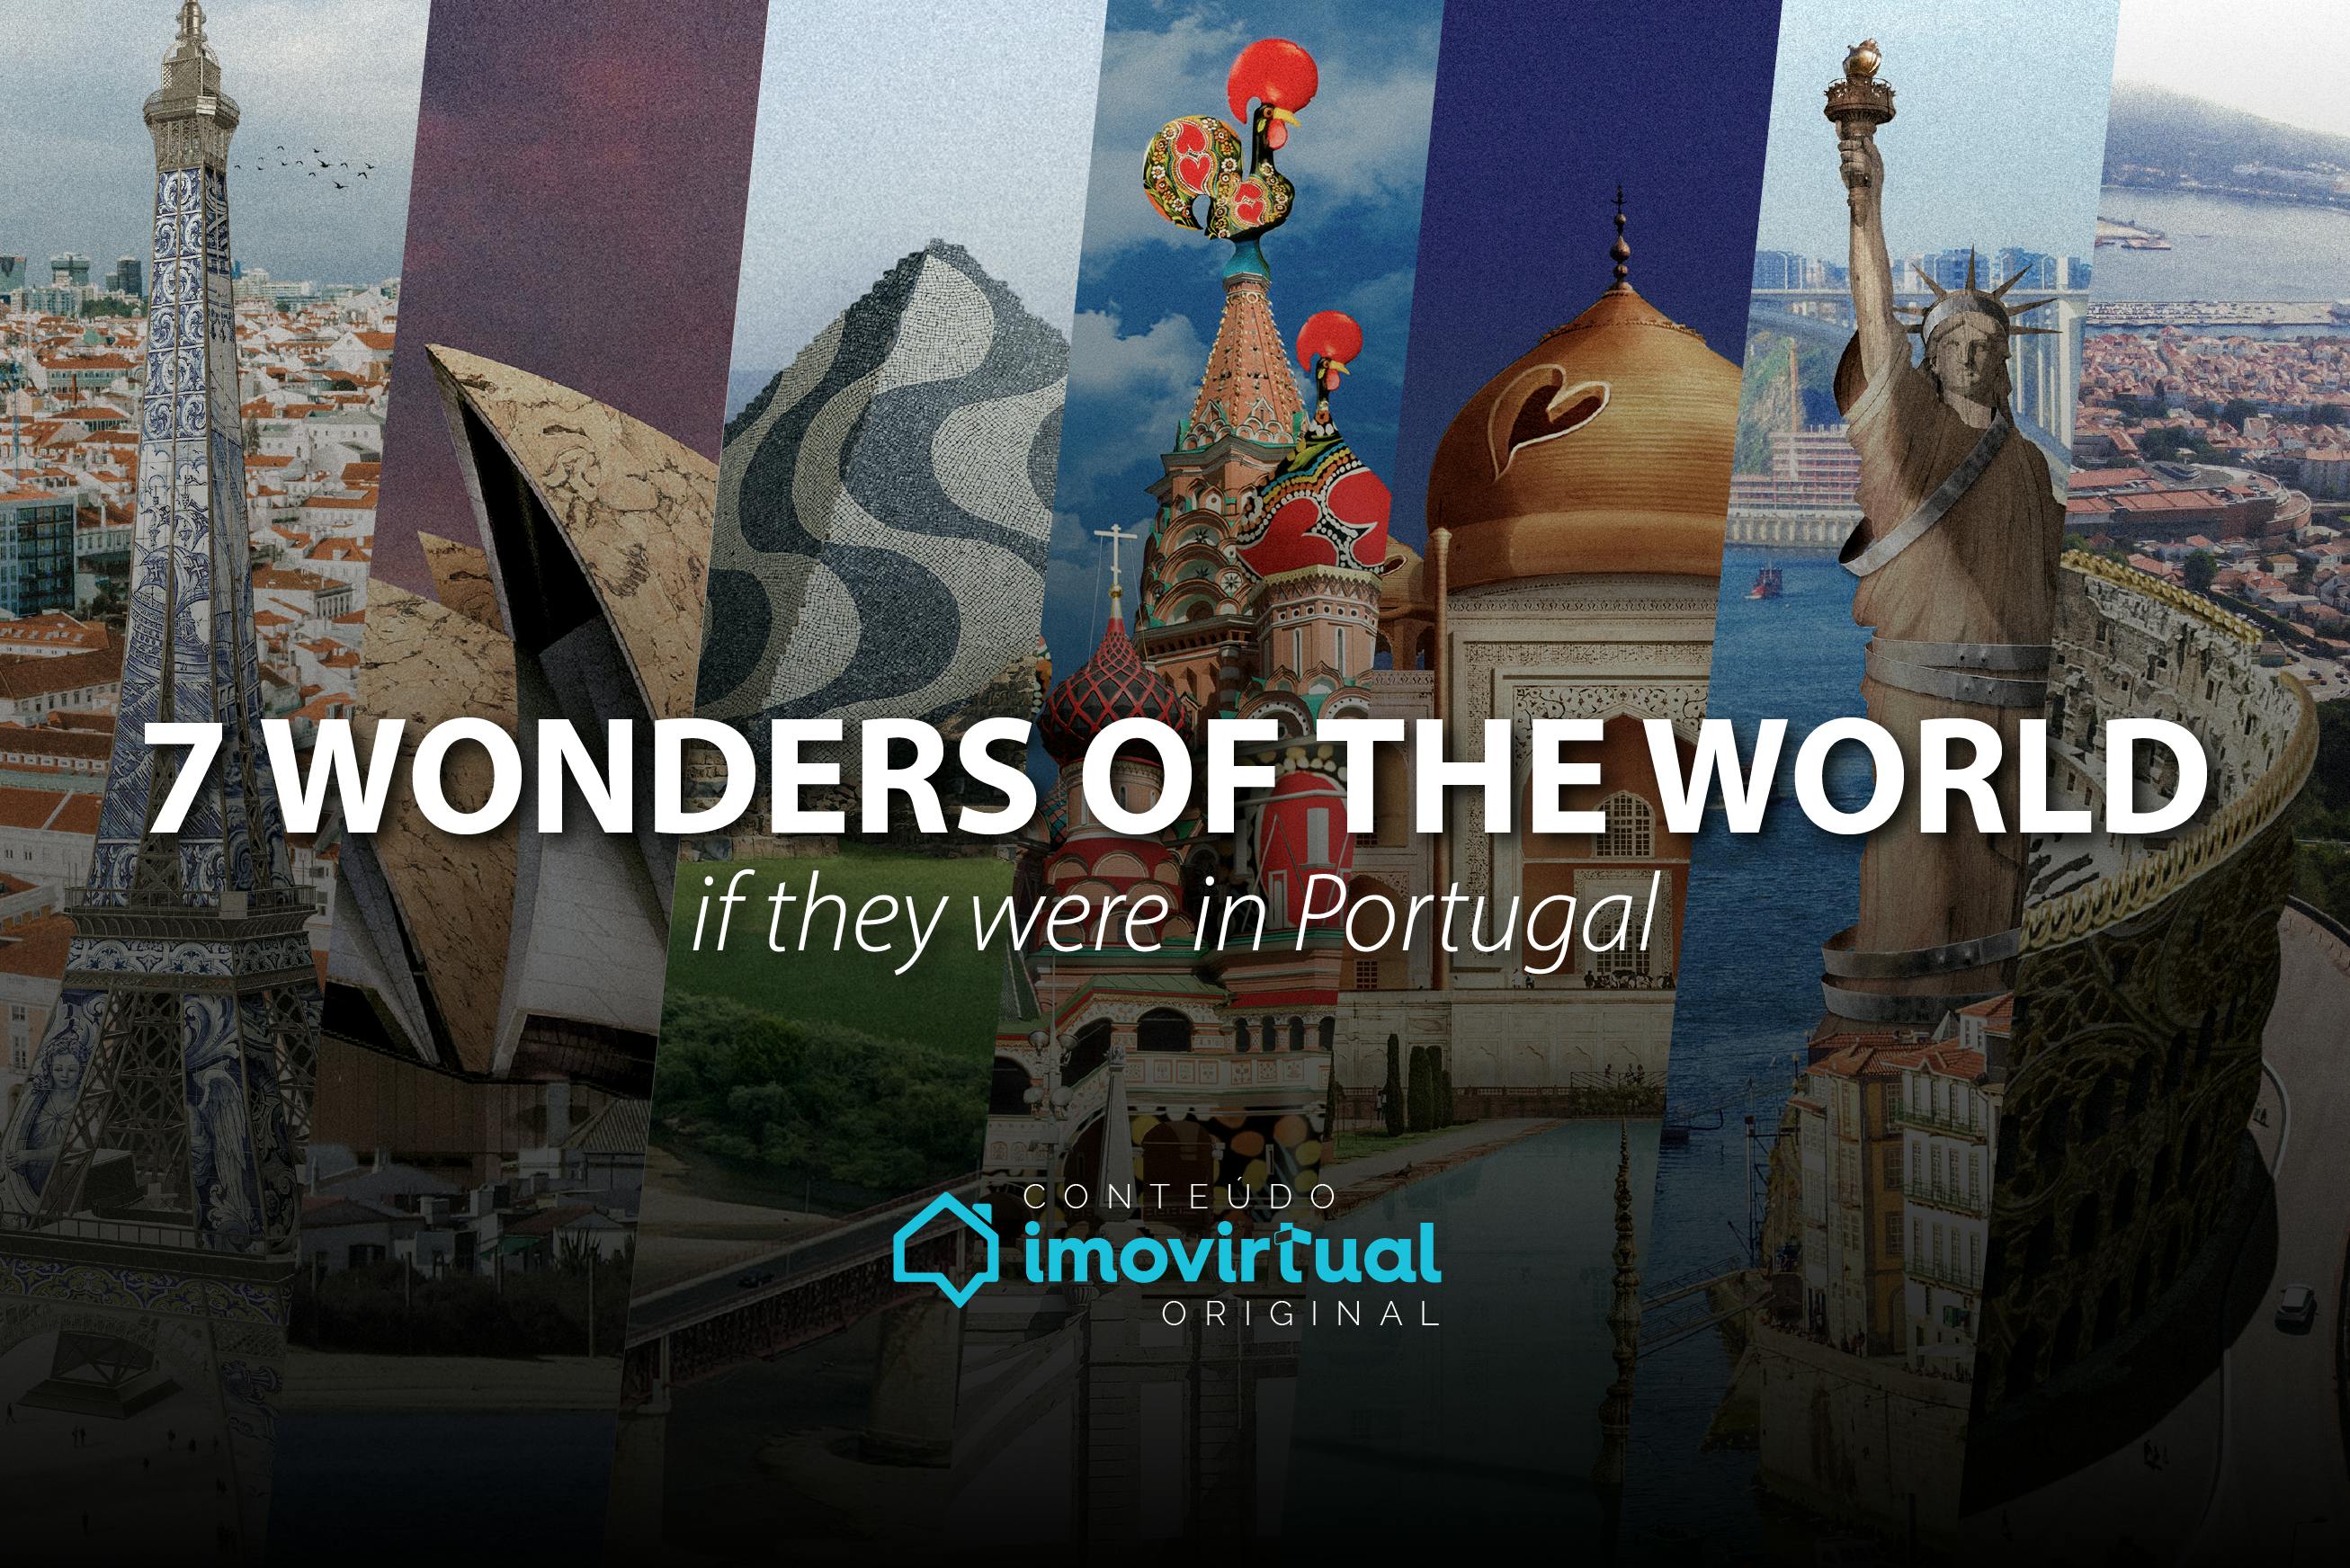 7 wonders of the world in Portugal